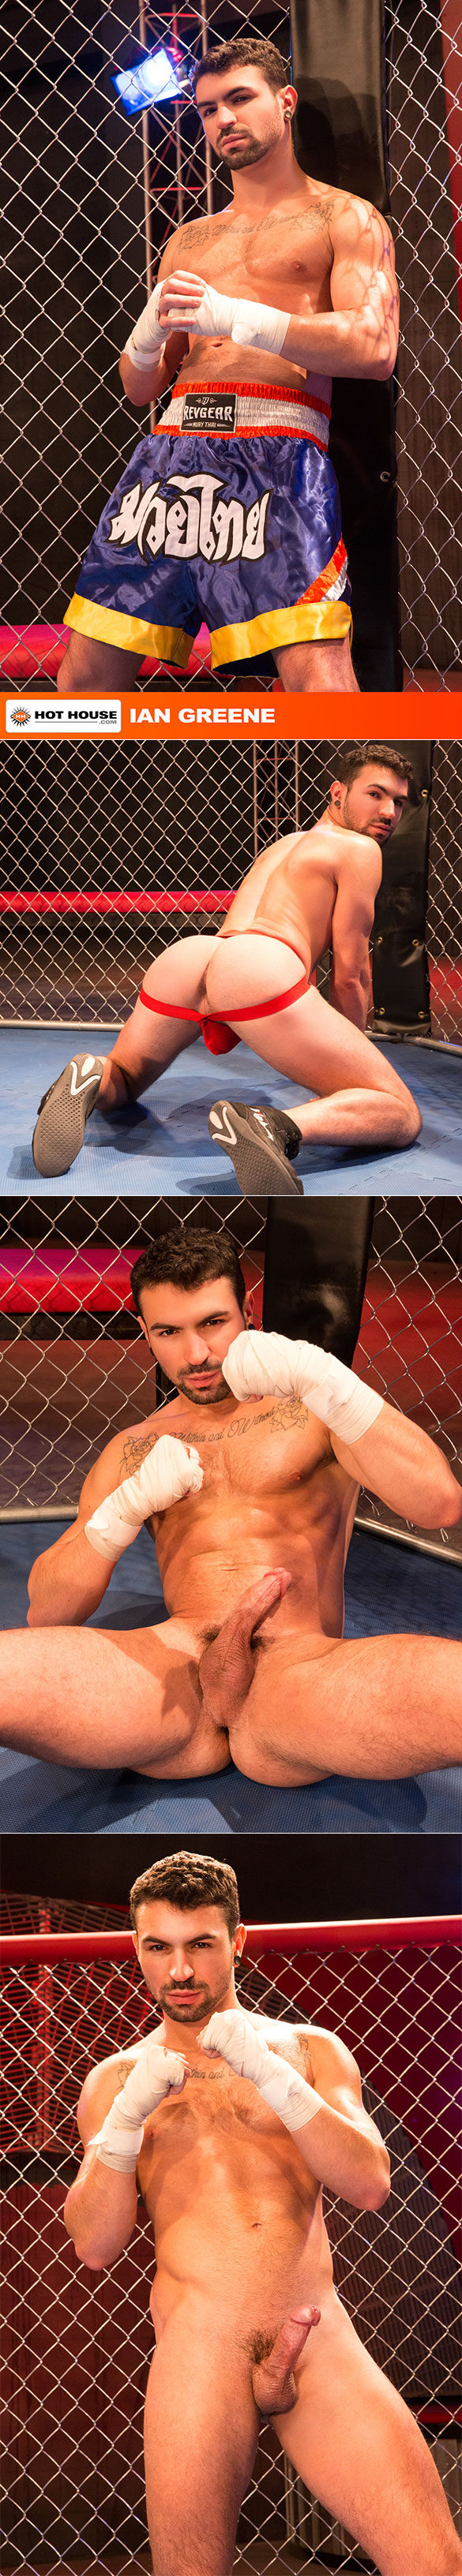 HotHouse: Ryan Rose pounds Ian Greene in "TKO Total Knockouts"